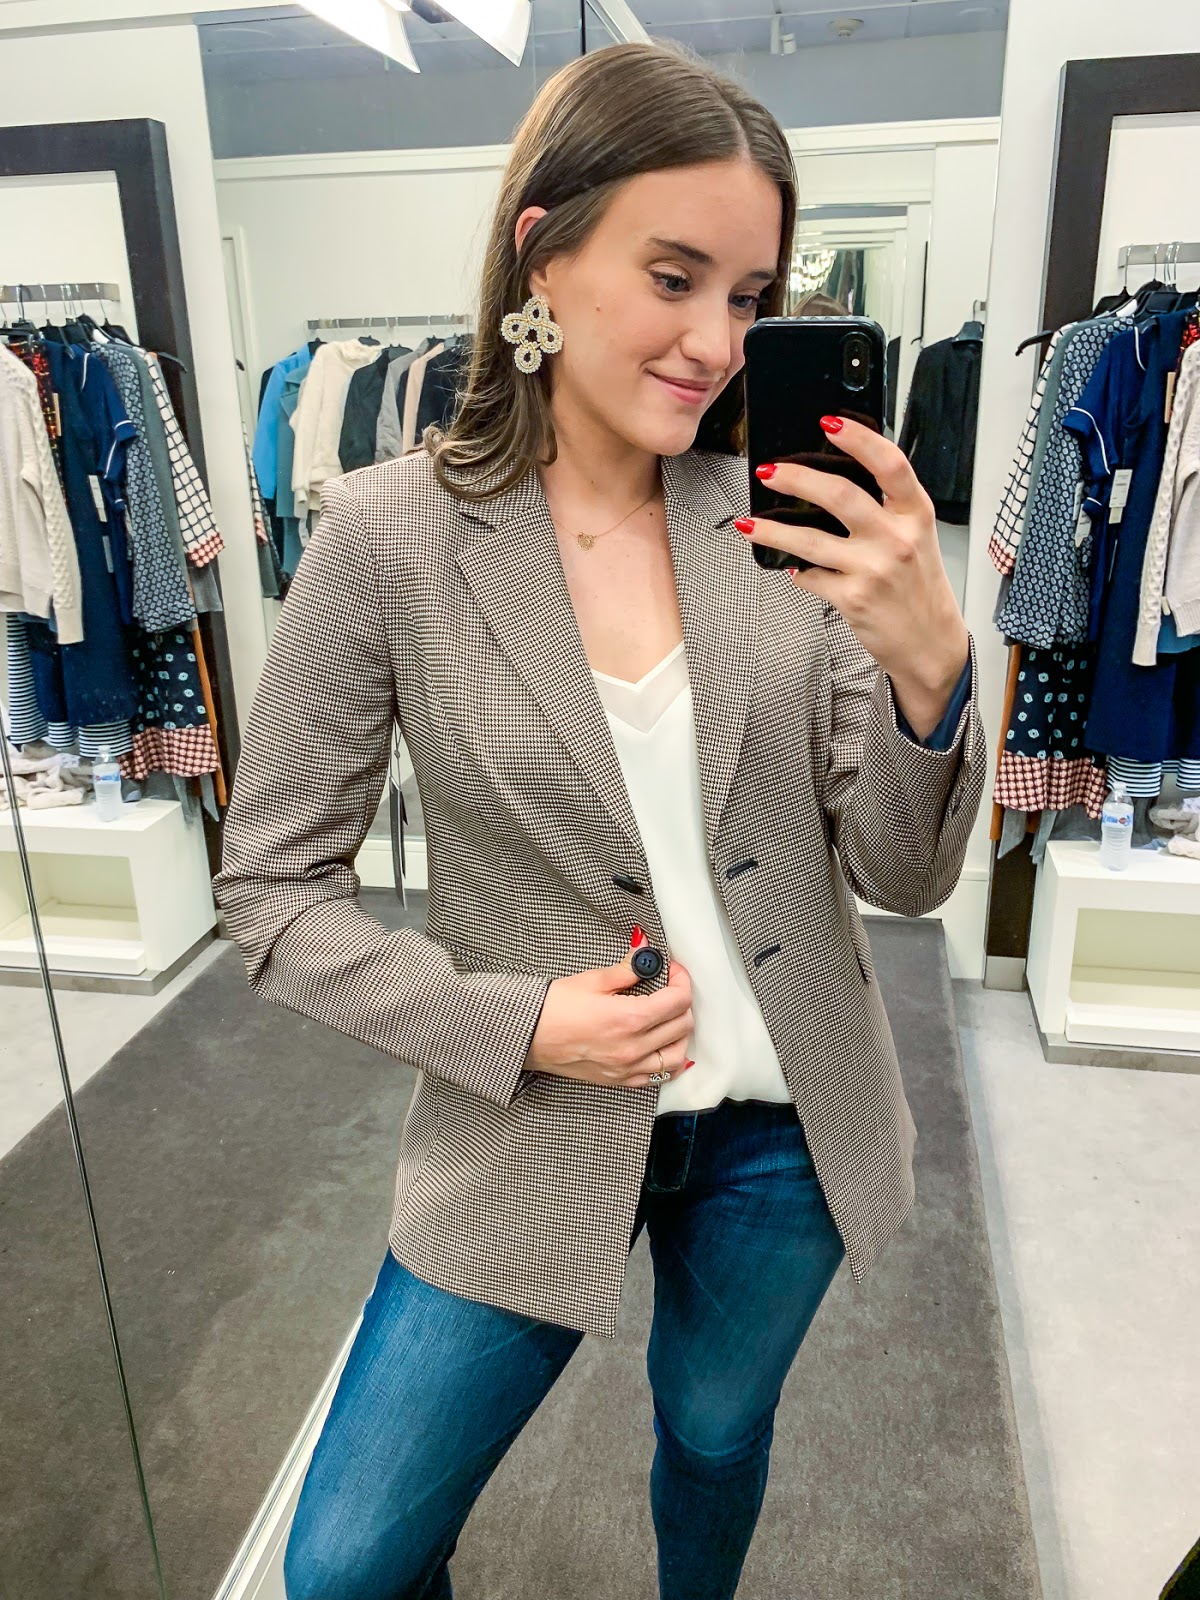 2019 Nordstrom Anniversary Early Access Try On Haul: Sizing and Reviews ...